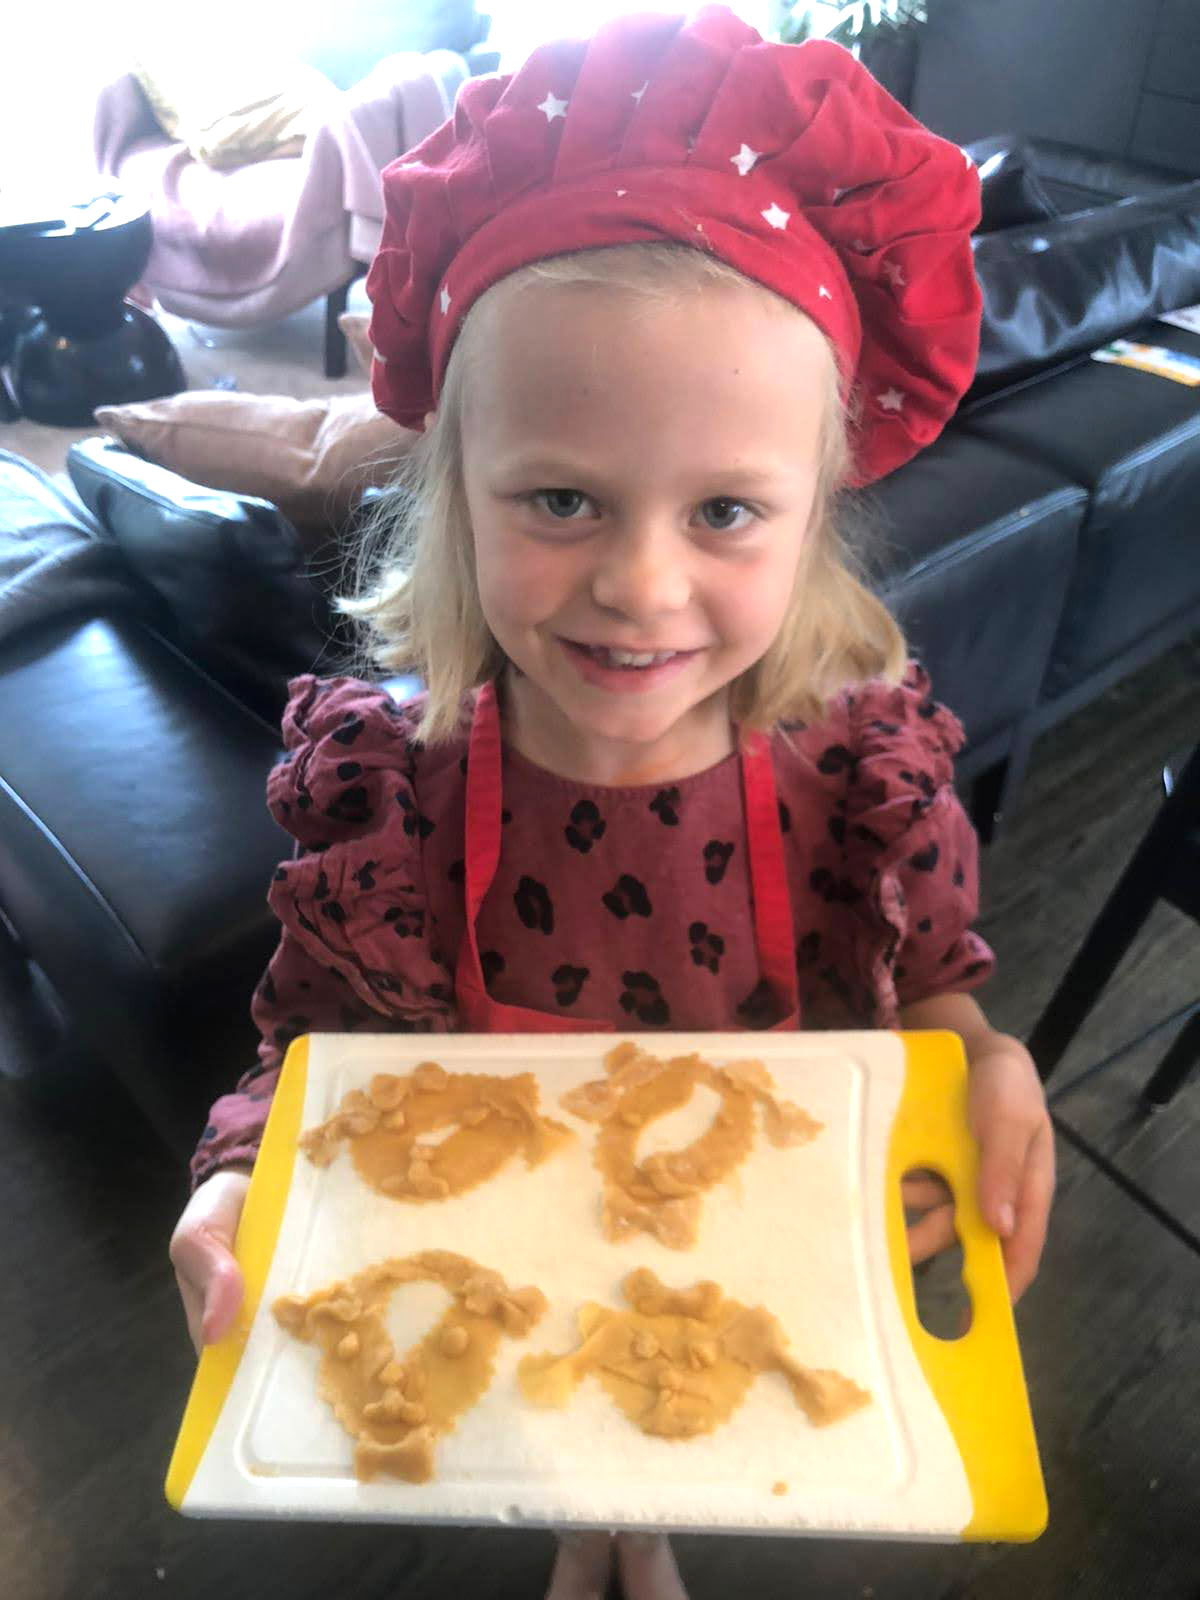 Sienna Guise, now 8, holds a tray of pasta she made during the first lockdown in New Zealand.